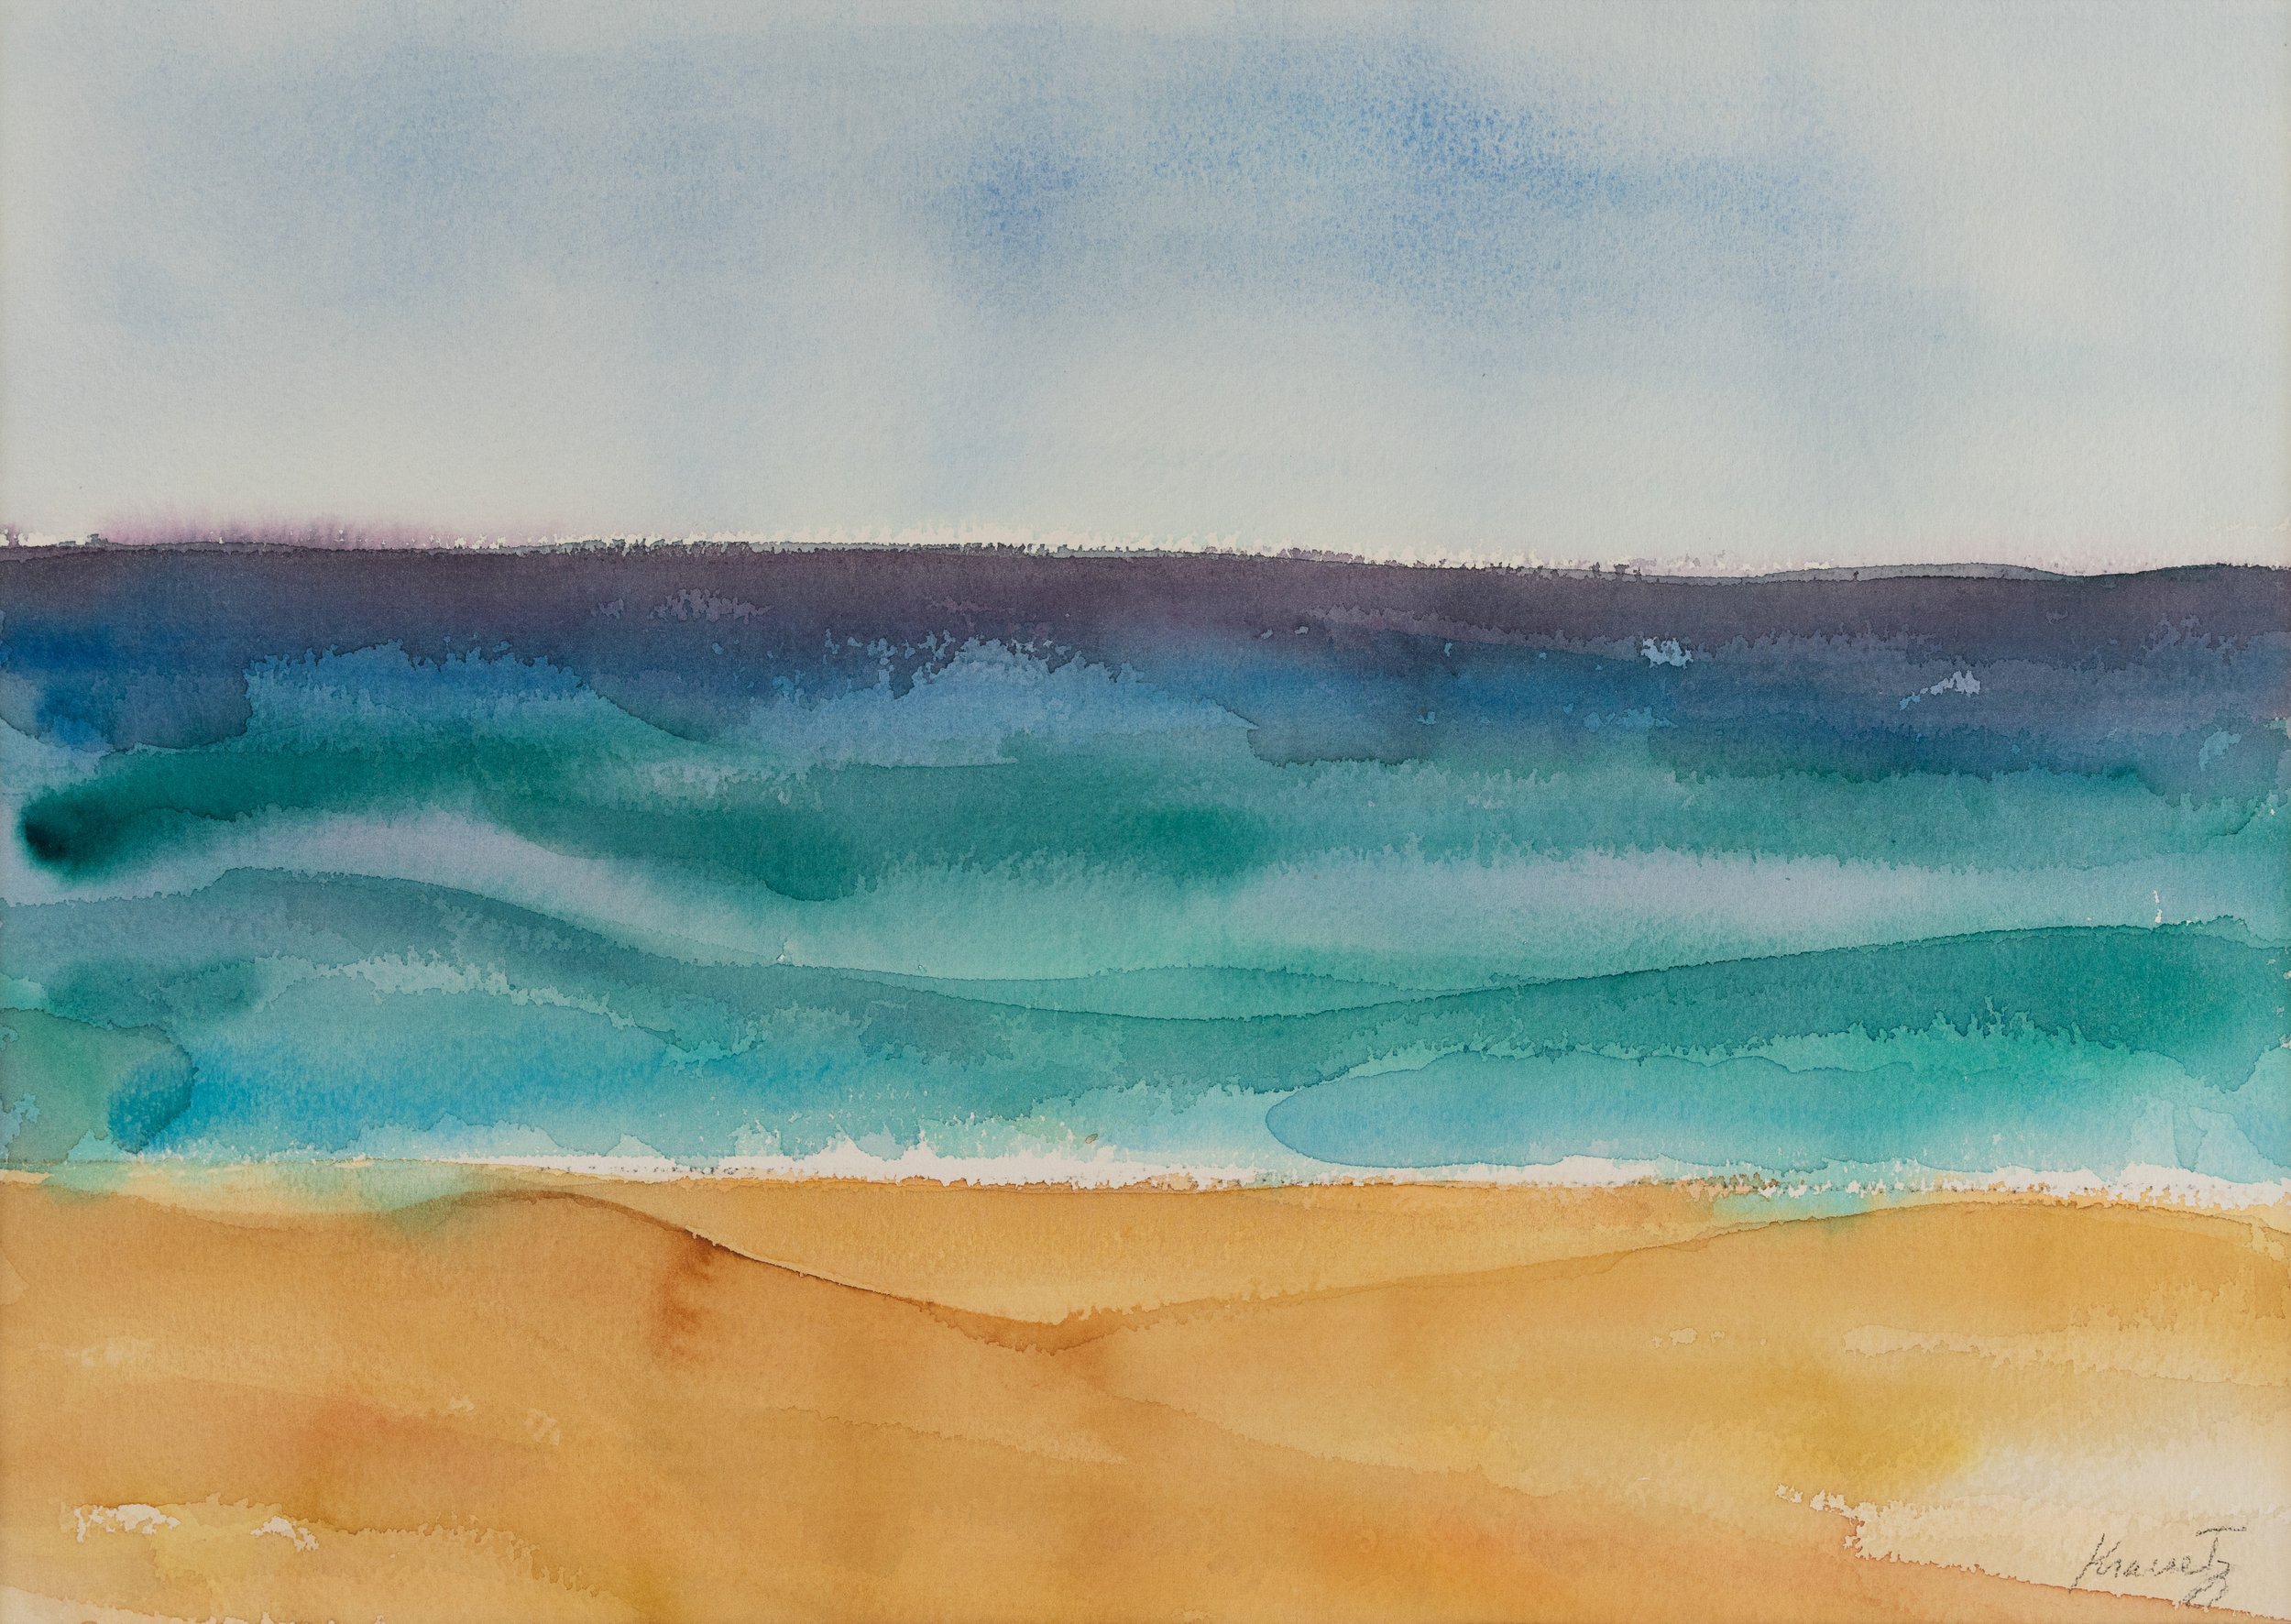 Untitled (Seascape), 1991, watercolor, 22x30 inches with mat